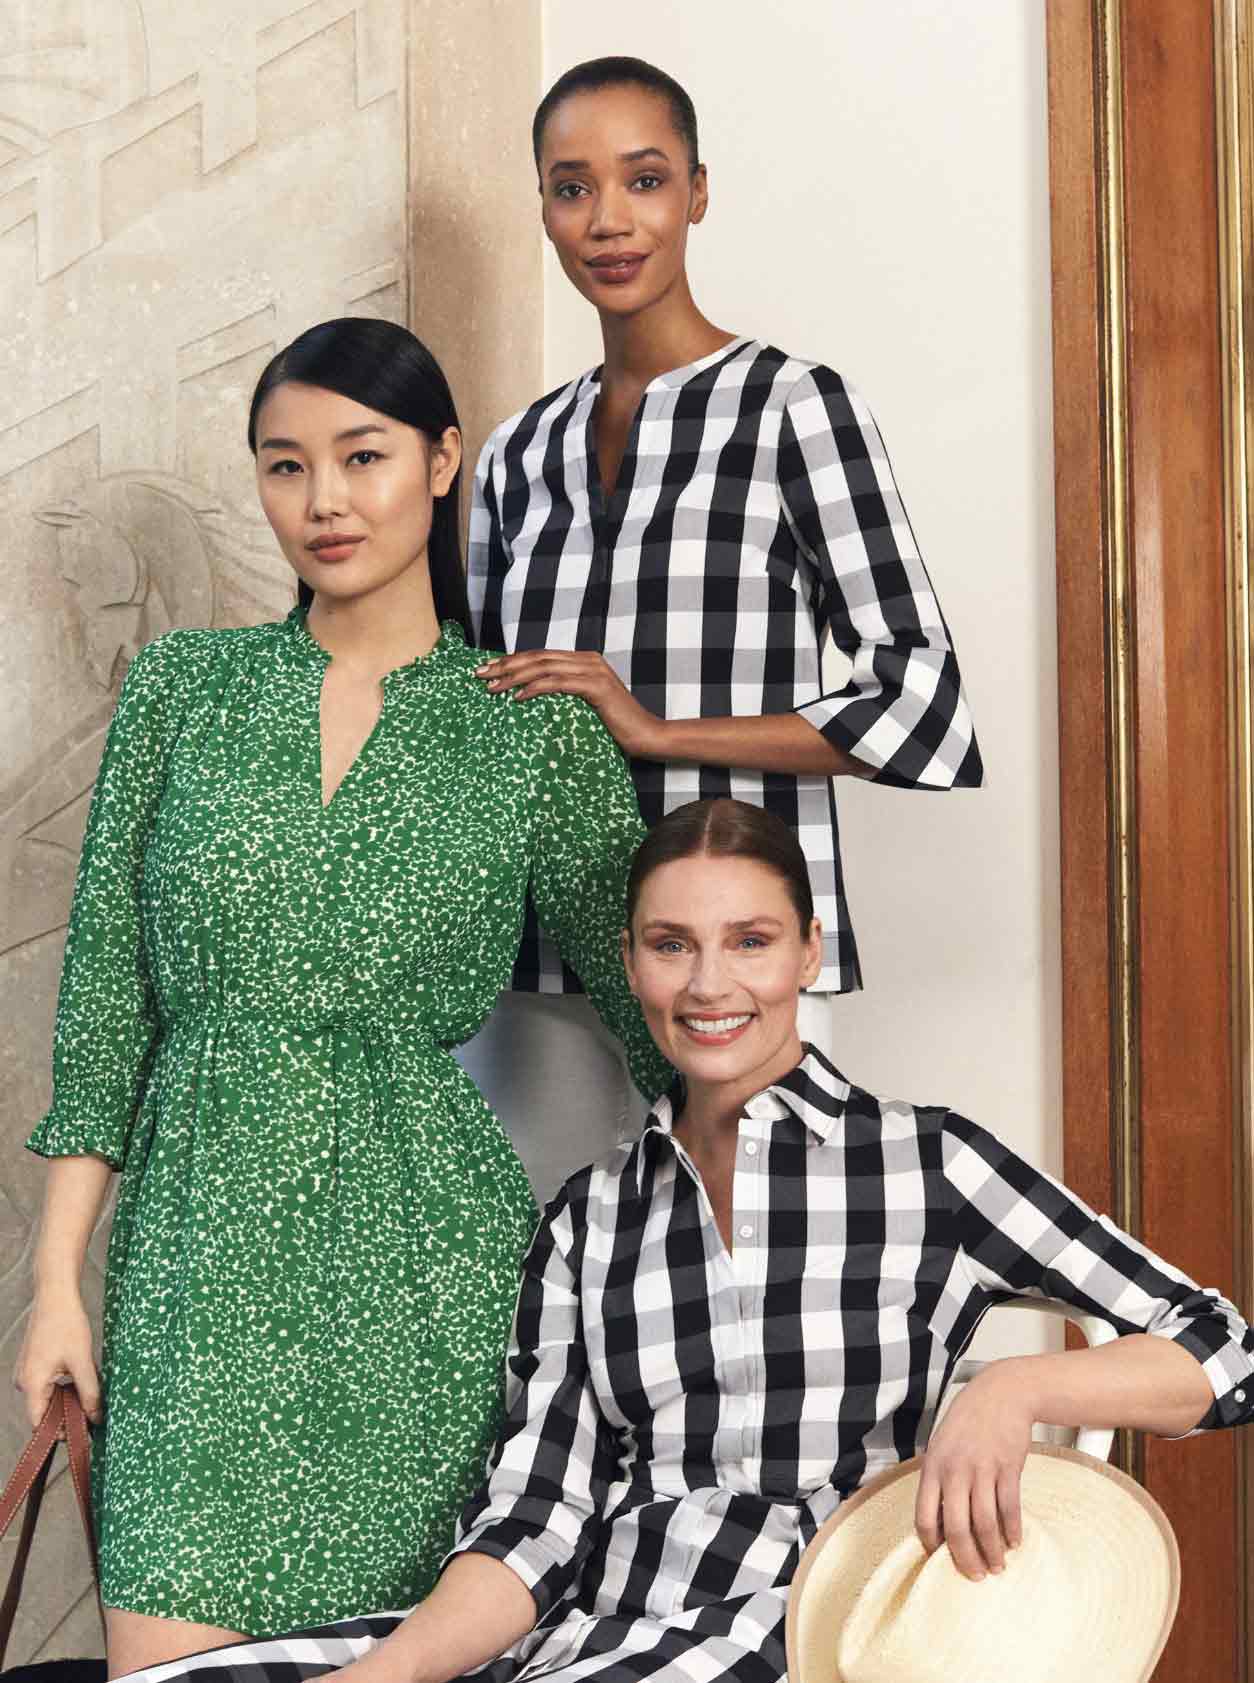 A group of Hobbs models pose wearing a gingham dress, green dress and gingham top.